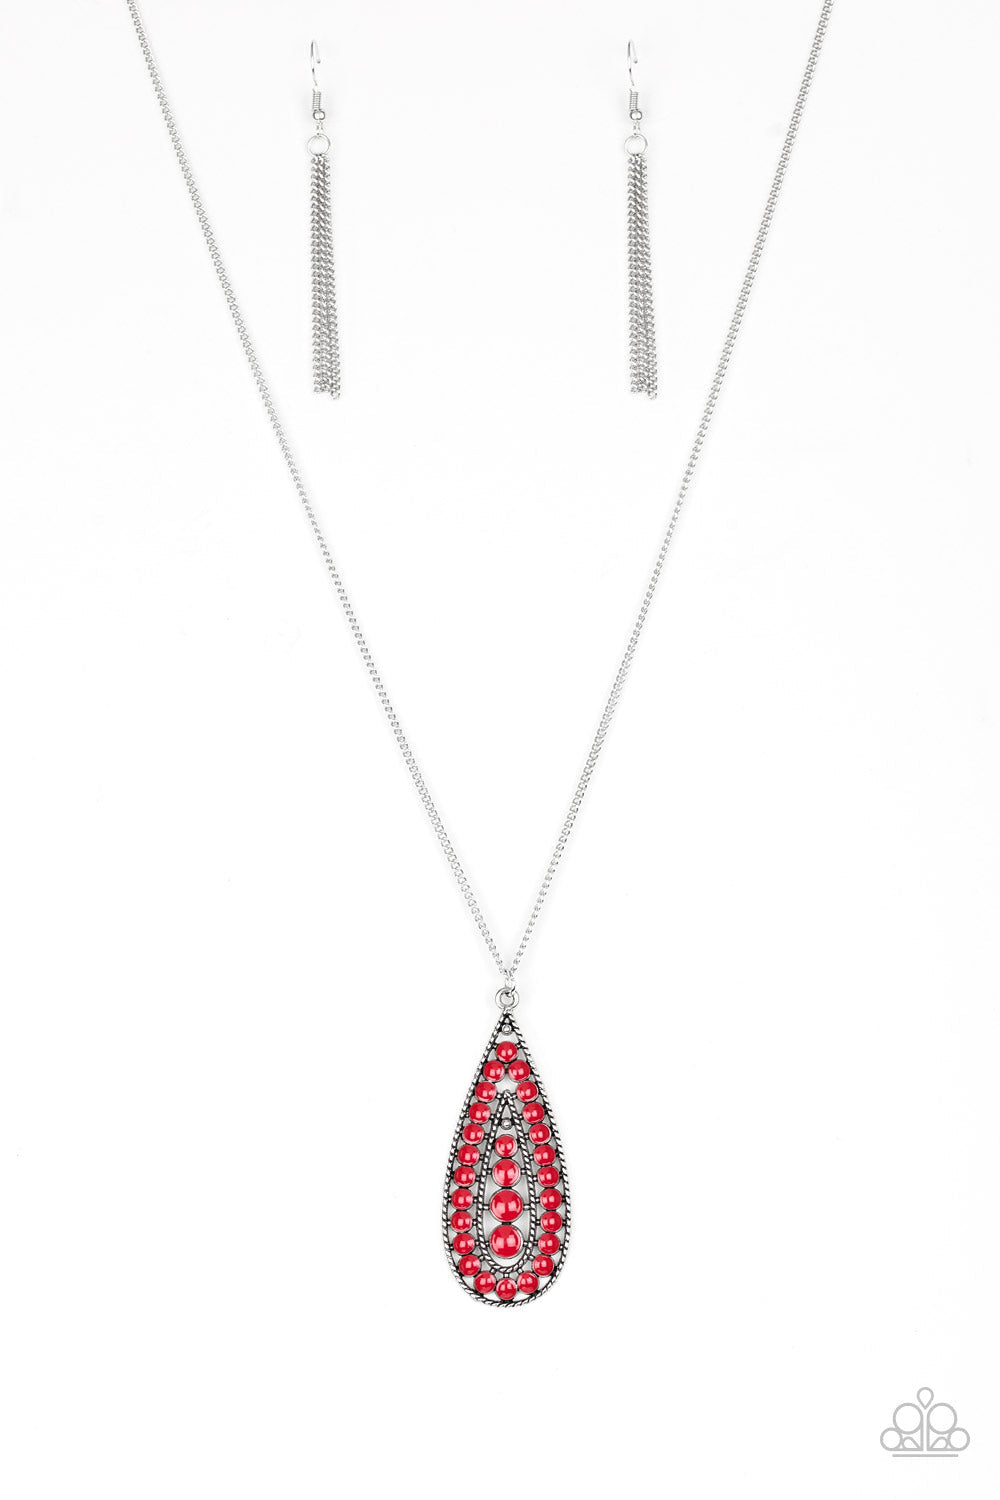 Tiki Tease - Red and Silver Fashion Necklace - Paparazzi Accessories - Fiery red finish a bubbly silver teardrop swings from the bottom of an long silver chain for a tribal inspired look. Features an adjustable clasp closure.